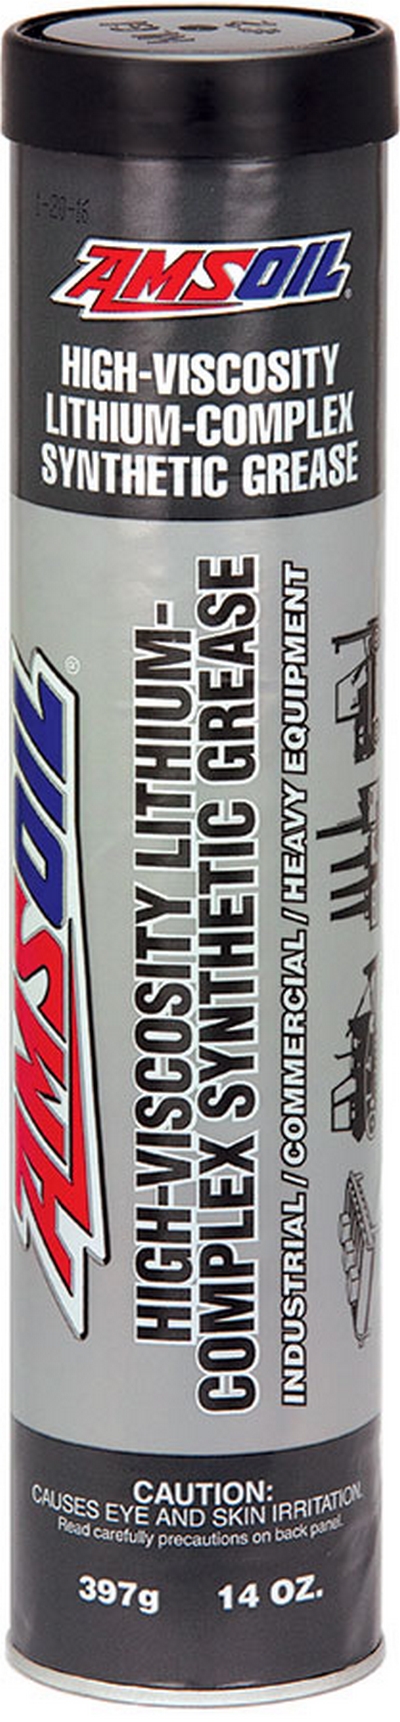 High-Viscosity Lithium-Complex Synthetic Grease - 35 Pound Lug